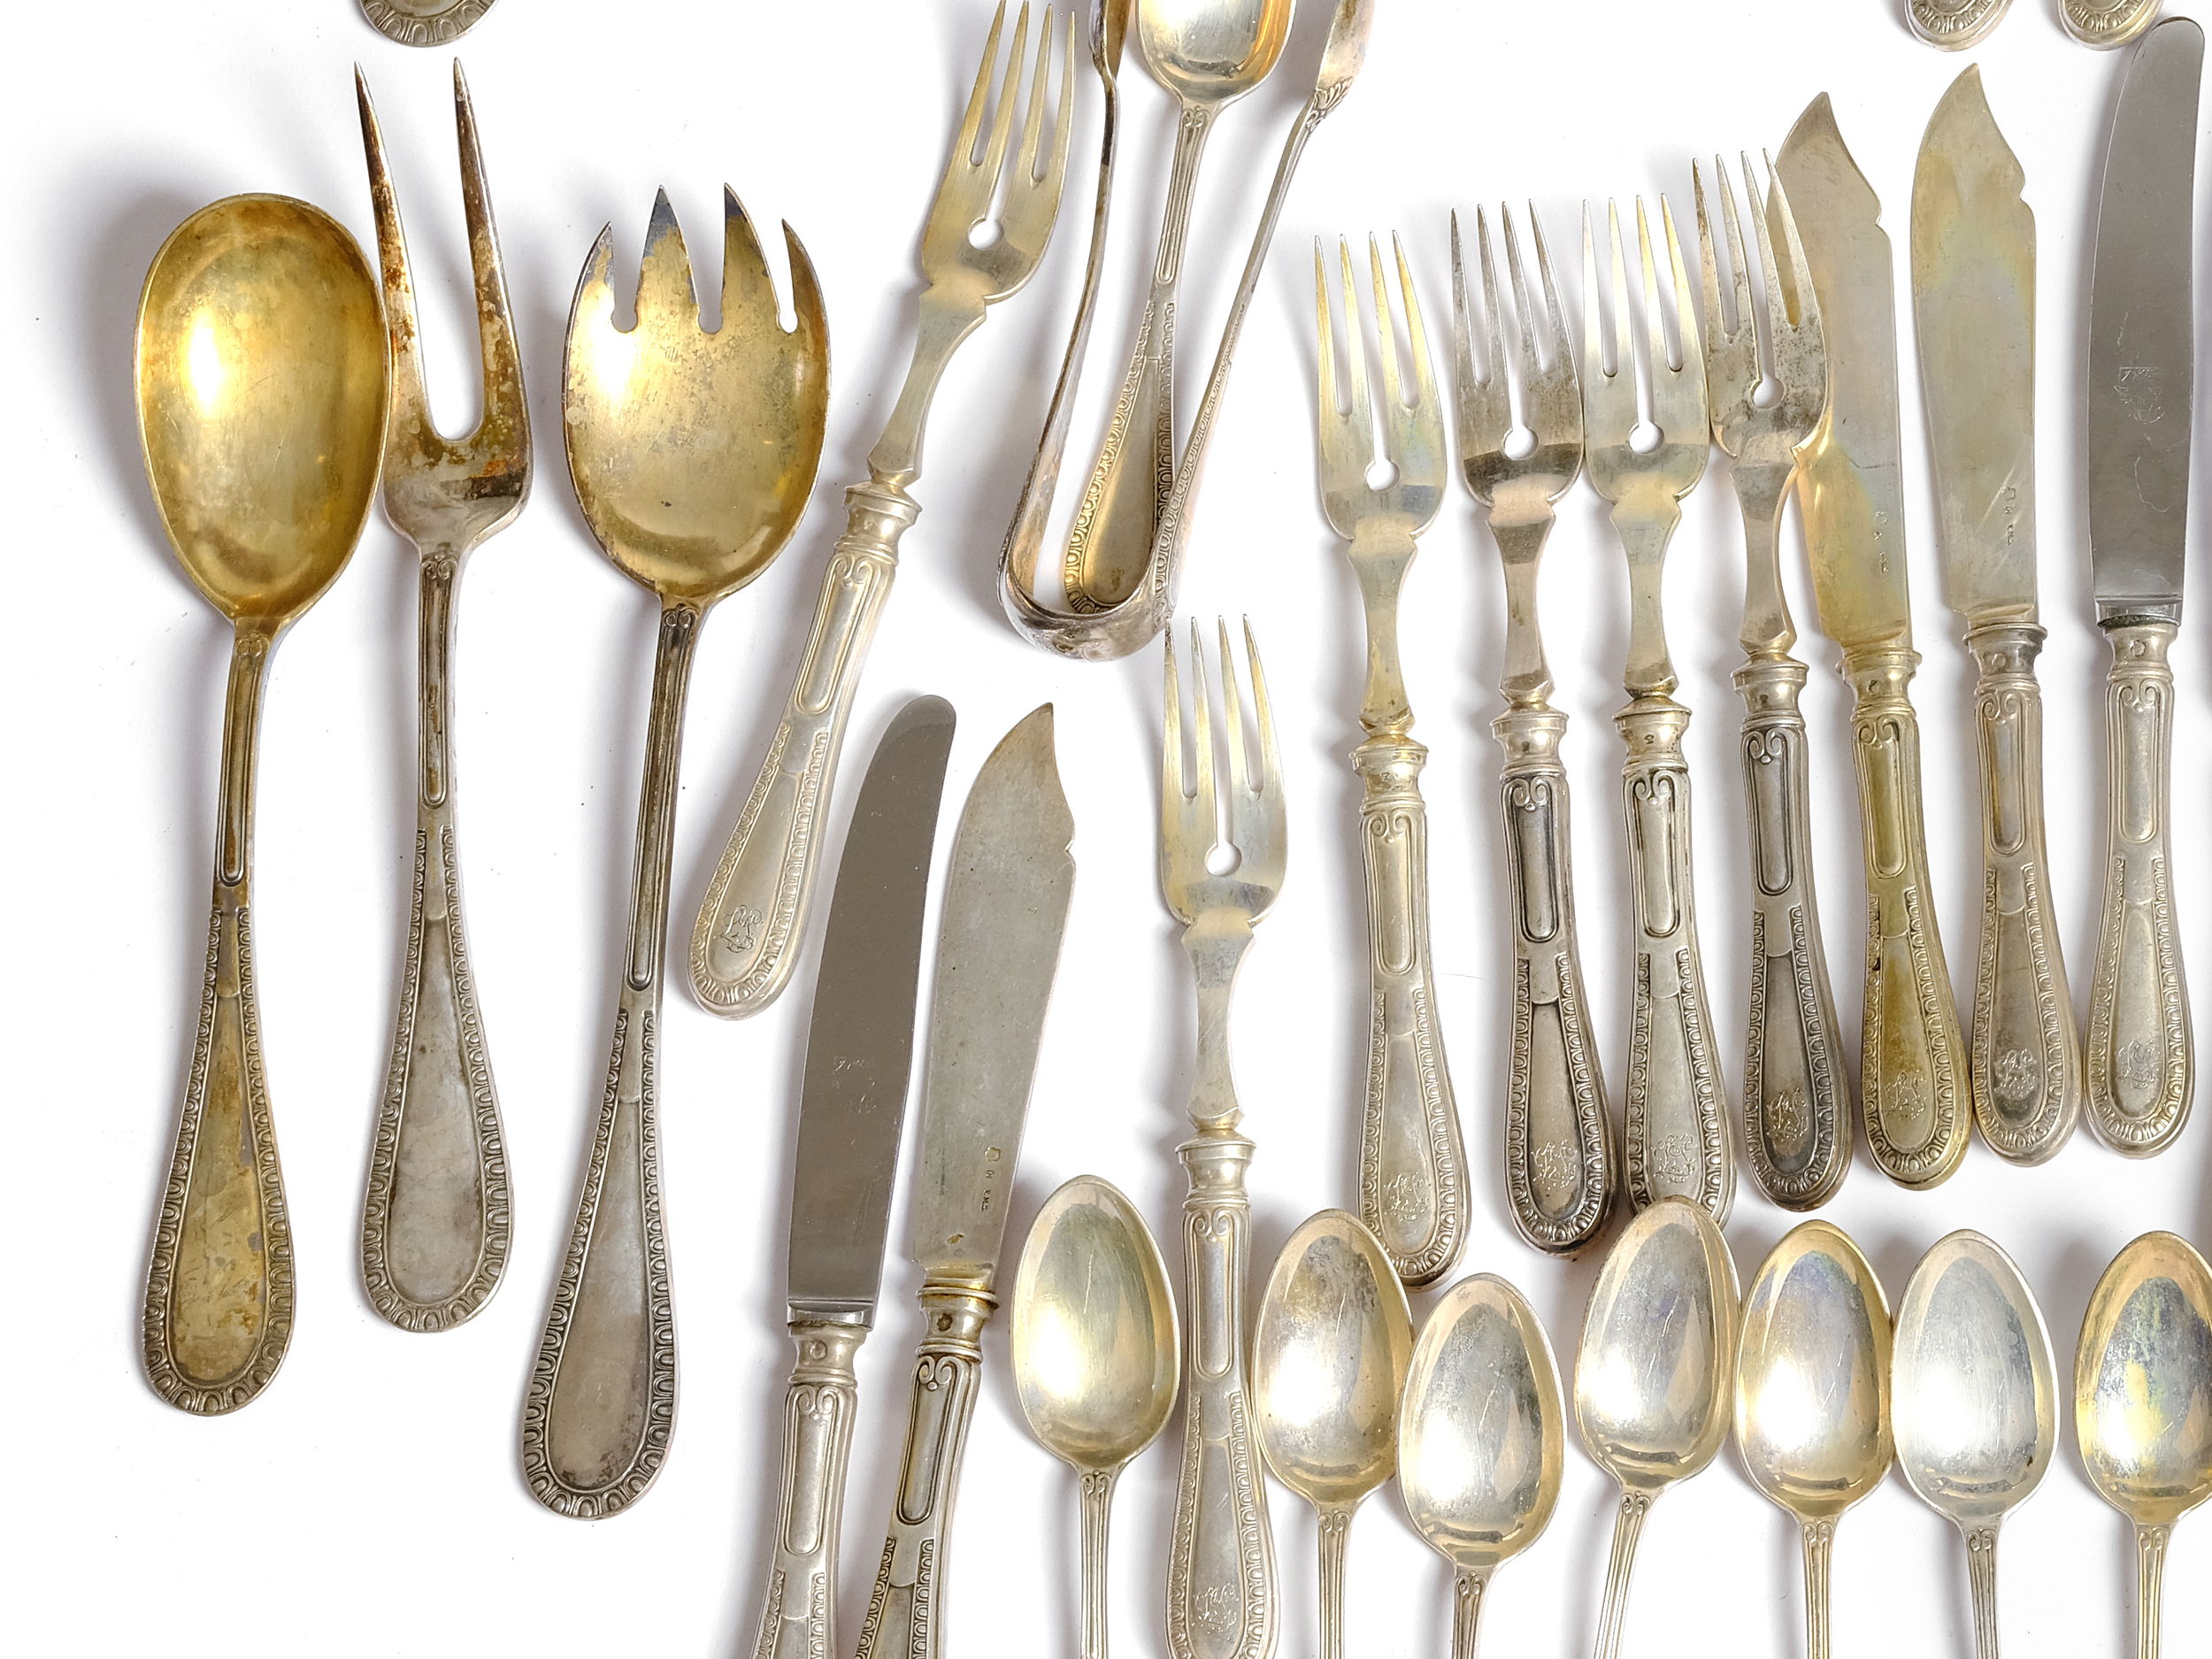 Large cutlery set, 93 pieces - Image 3 of 4